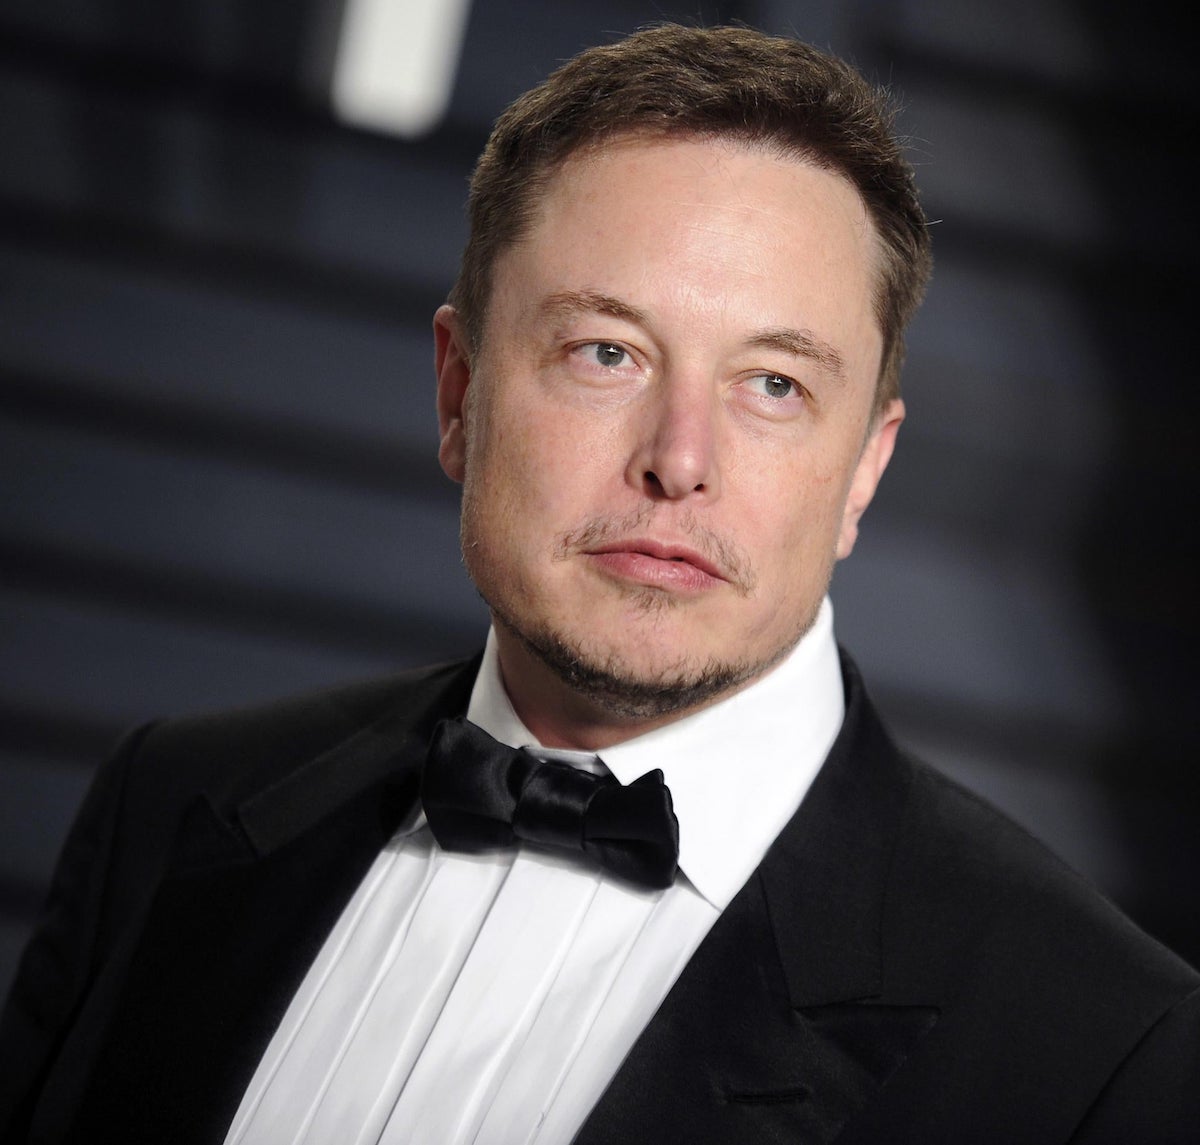 Editorial: On Observing the Phenomenon of Elon Musk